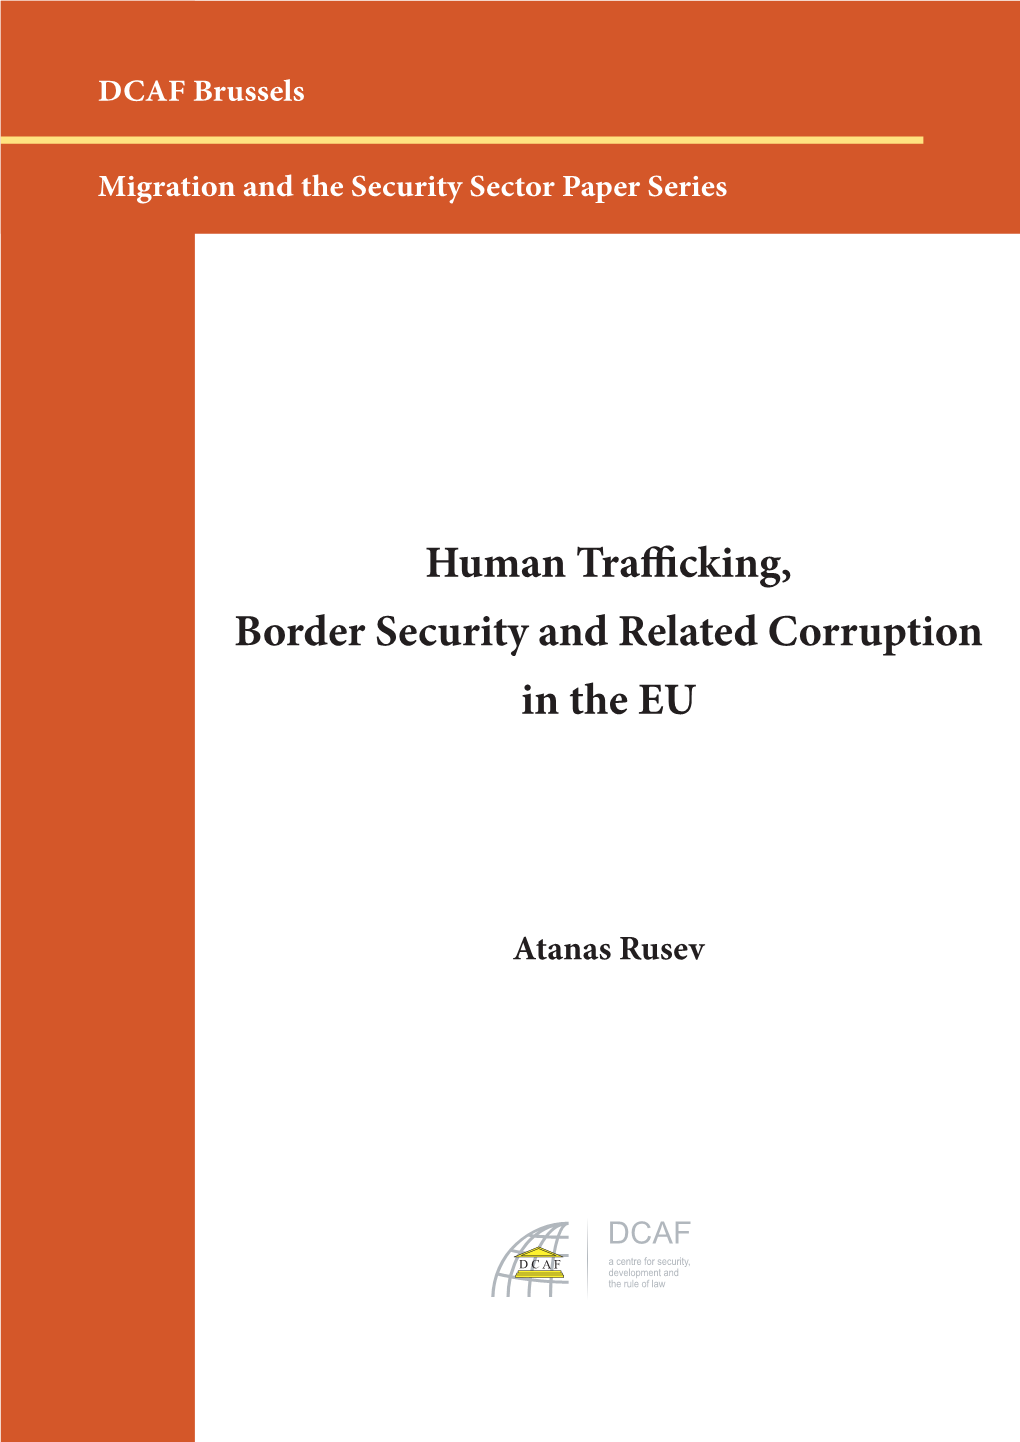 Human Trafficking, Border Security and Related Corruption in the EU